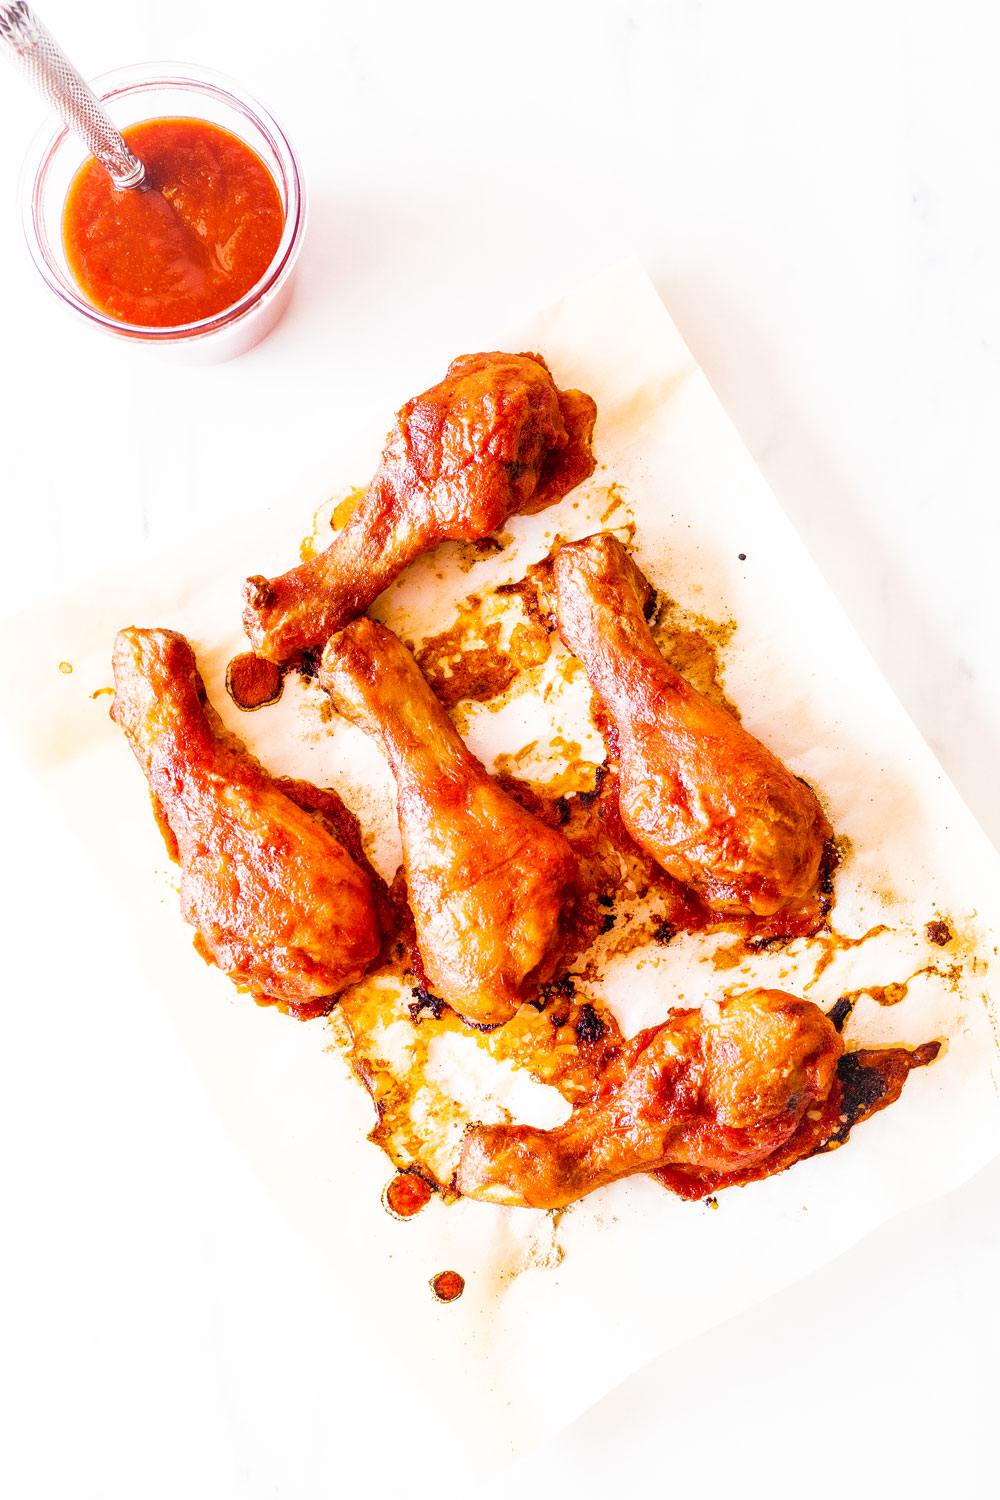 Perfect for your cookouts and backyard parties, these Caramelized Baked Barbecue Chicken Drumsticks are easy, flavorful and an instant crowd-pleaser you'll come back to all Spring and Summer long! https://www.spotebi.com/recipes/caramelized-baked-barbecue-chicken-drumsticks/